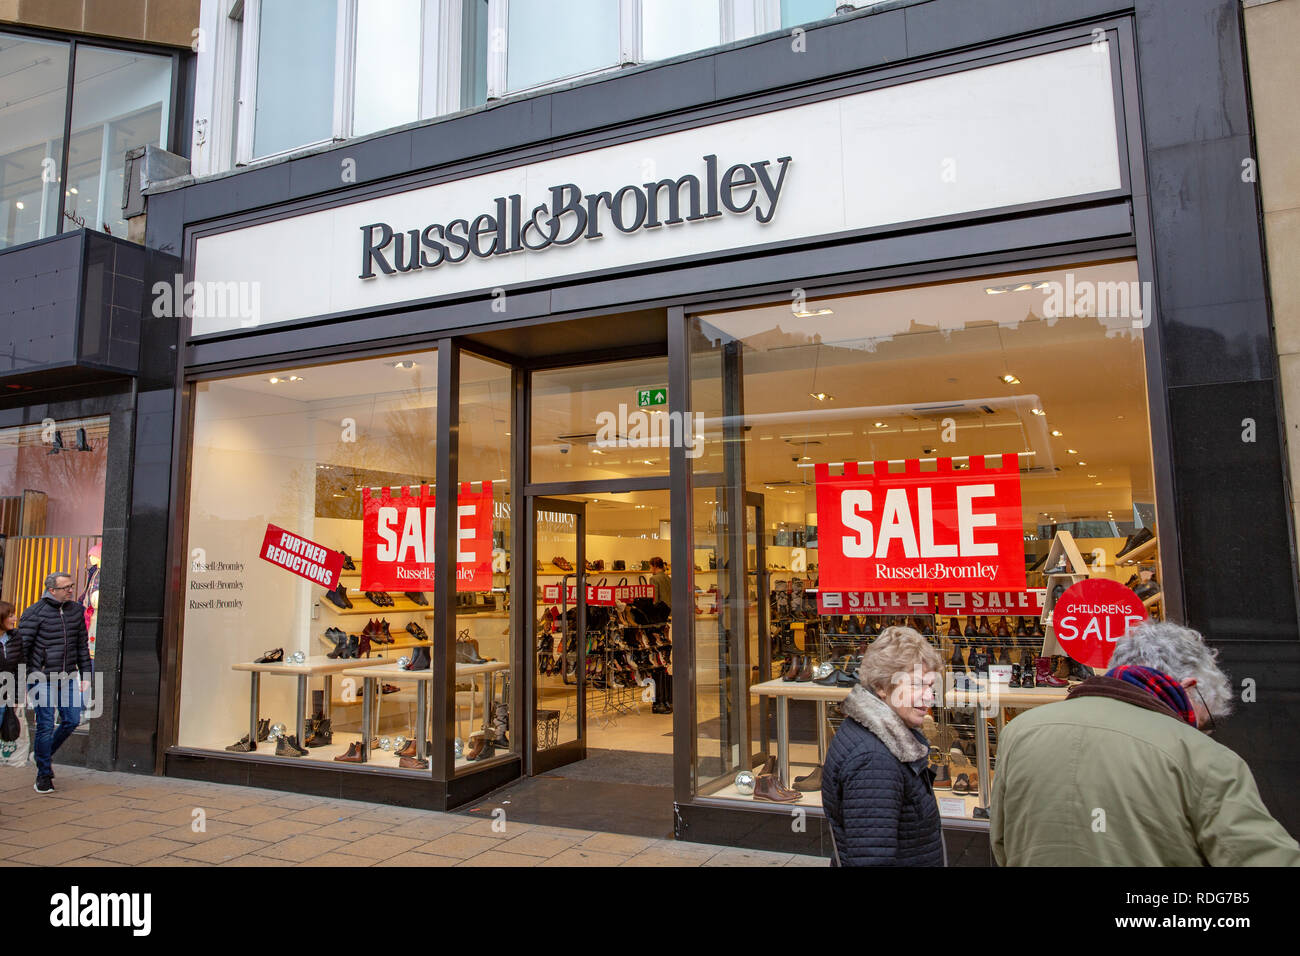 Russell and Bromley shoe store shop with January sales advertised, Princes Street,Edinburgh,Scotland Stock Photo